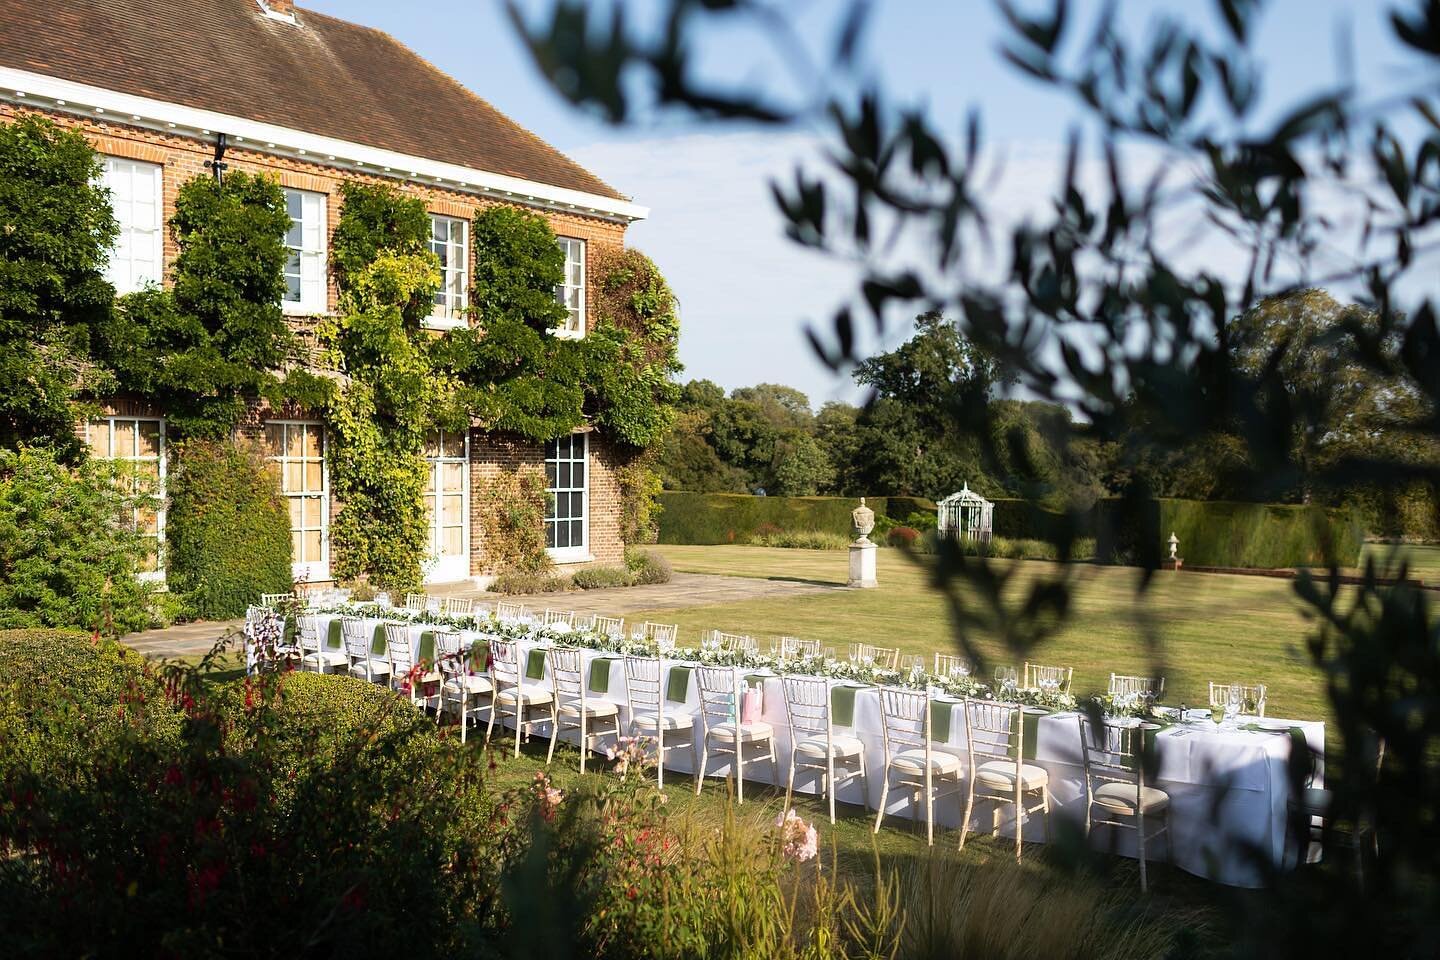 A very special Tuesday afternoon, seemingly the final day of the 2020 Indian Summer. For a wedding that should have been in France, this beautiful day and amazing location could not have been more of a perfect alternative! 👌✨💫